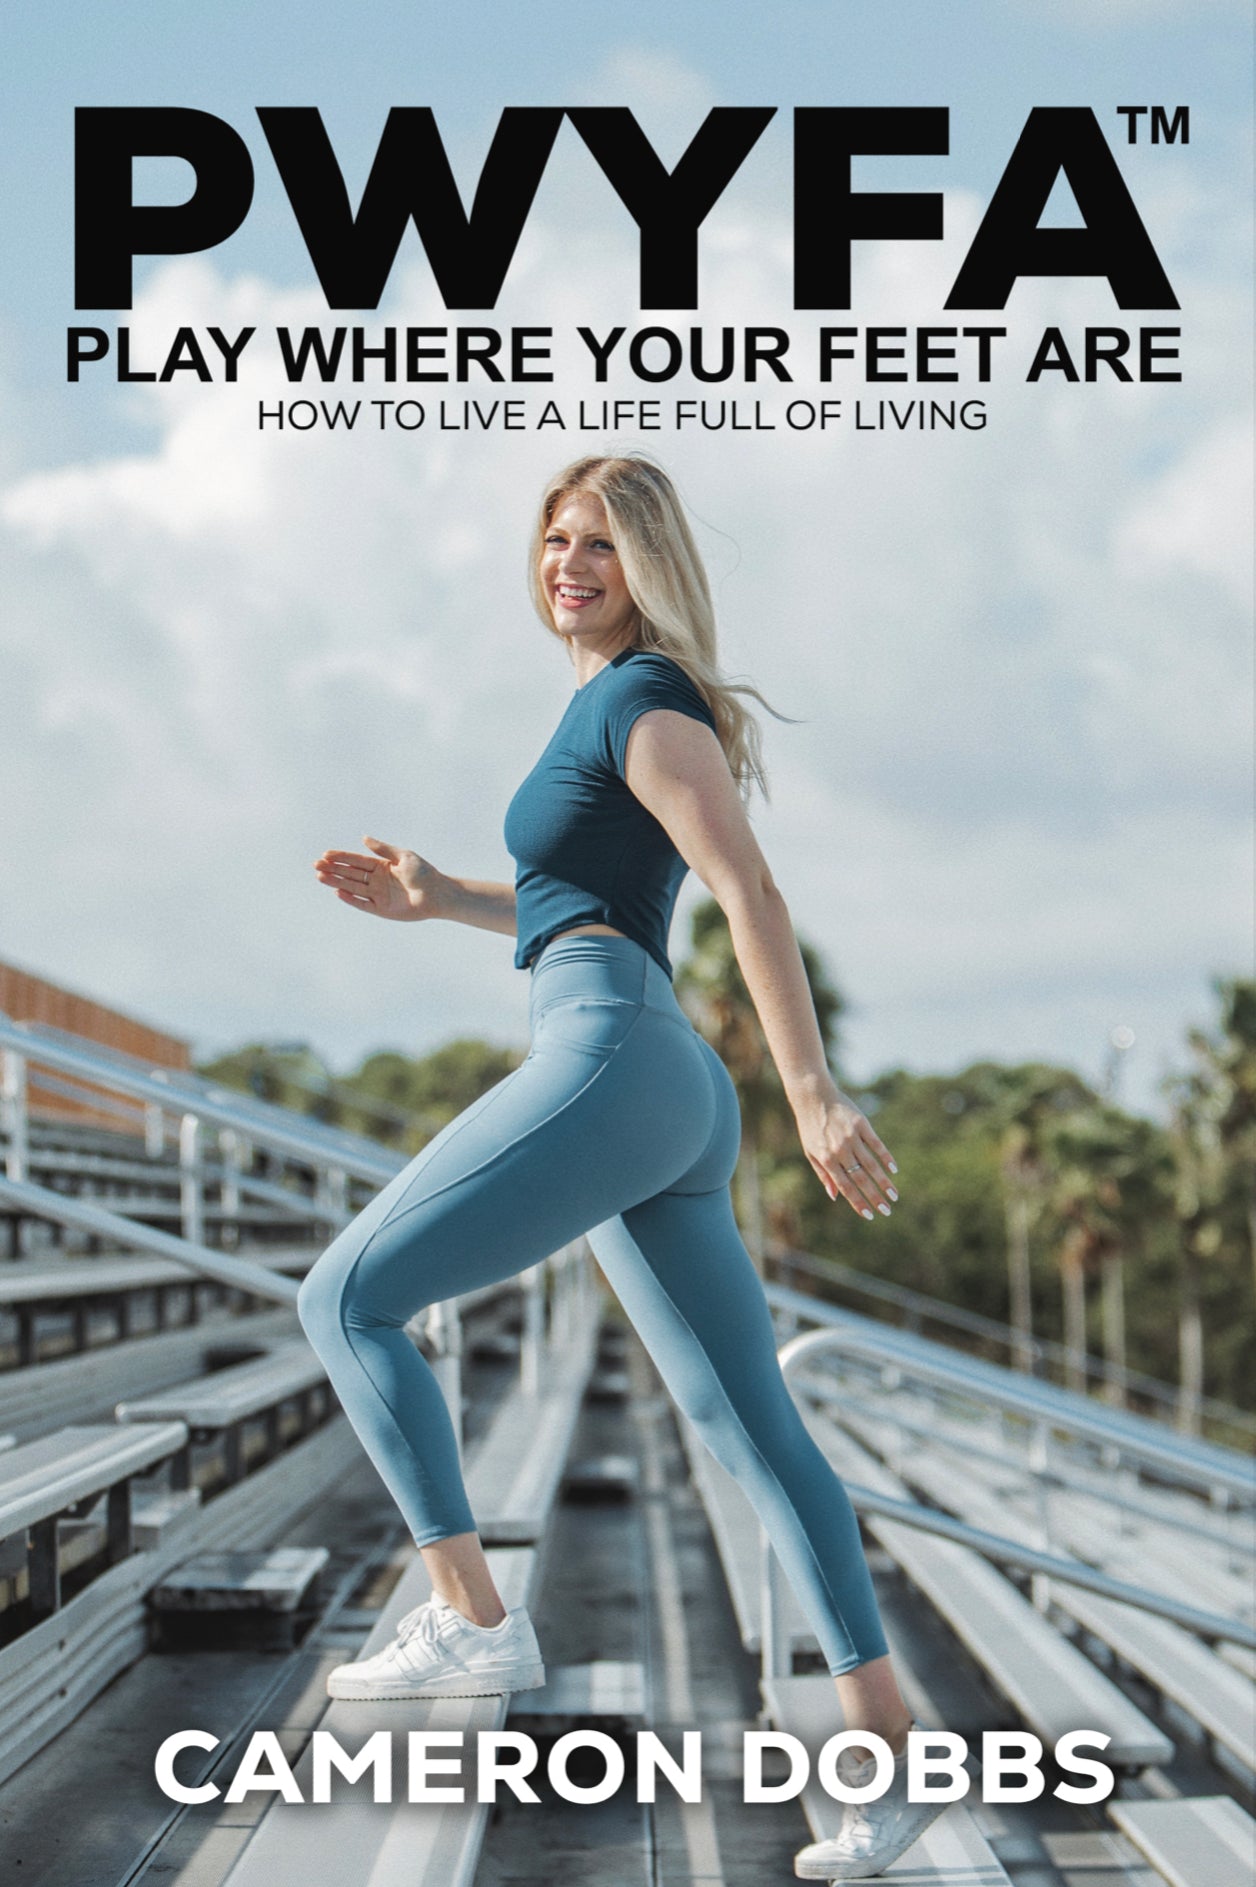 PWYFA Play Where Your Feet Are™: How to Live a Life Full of Living